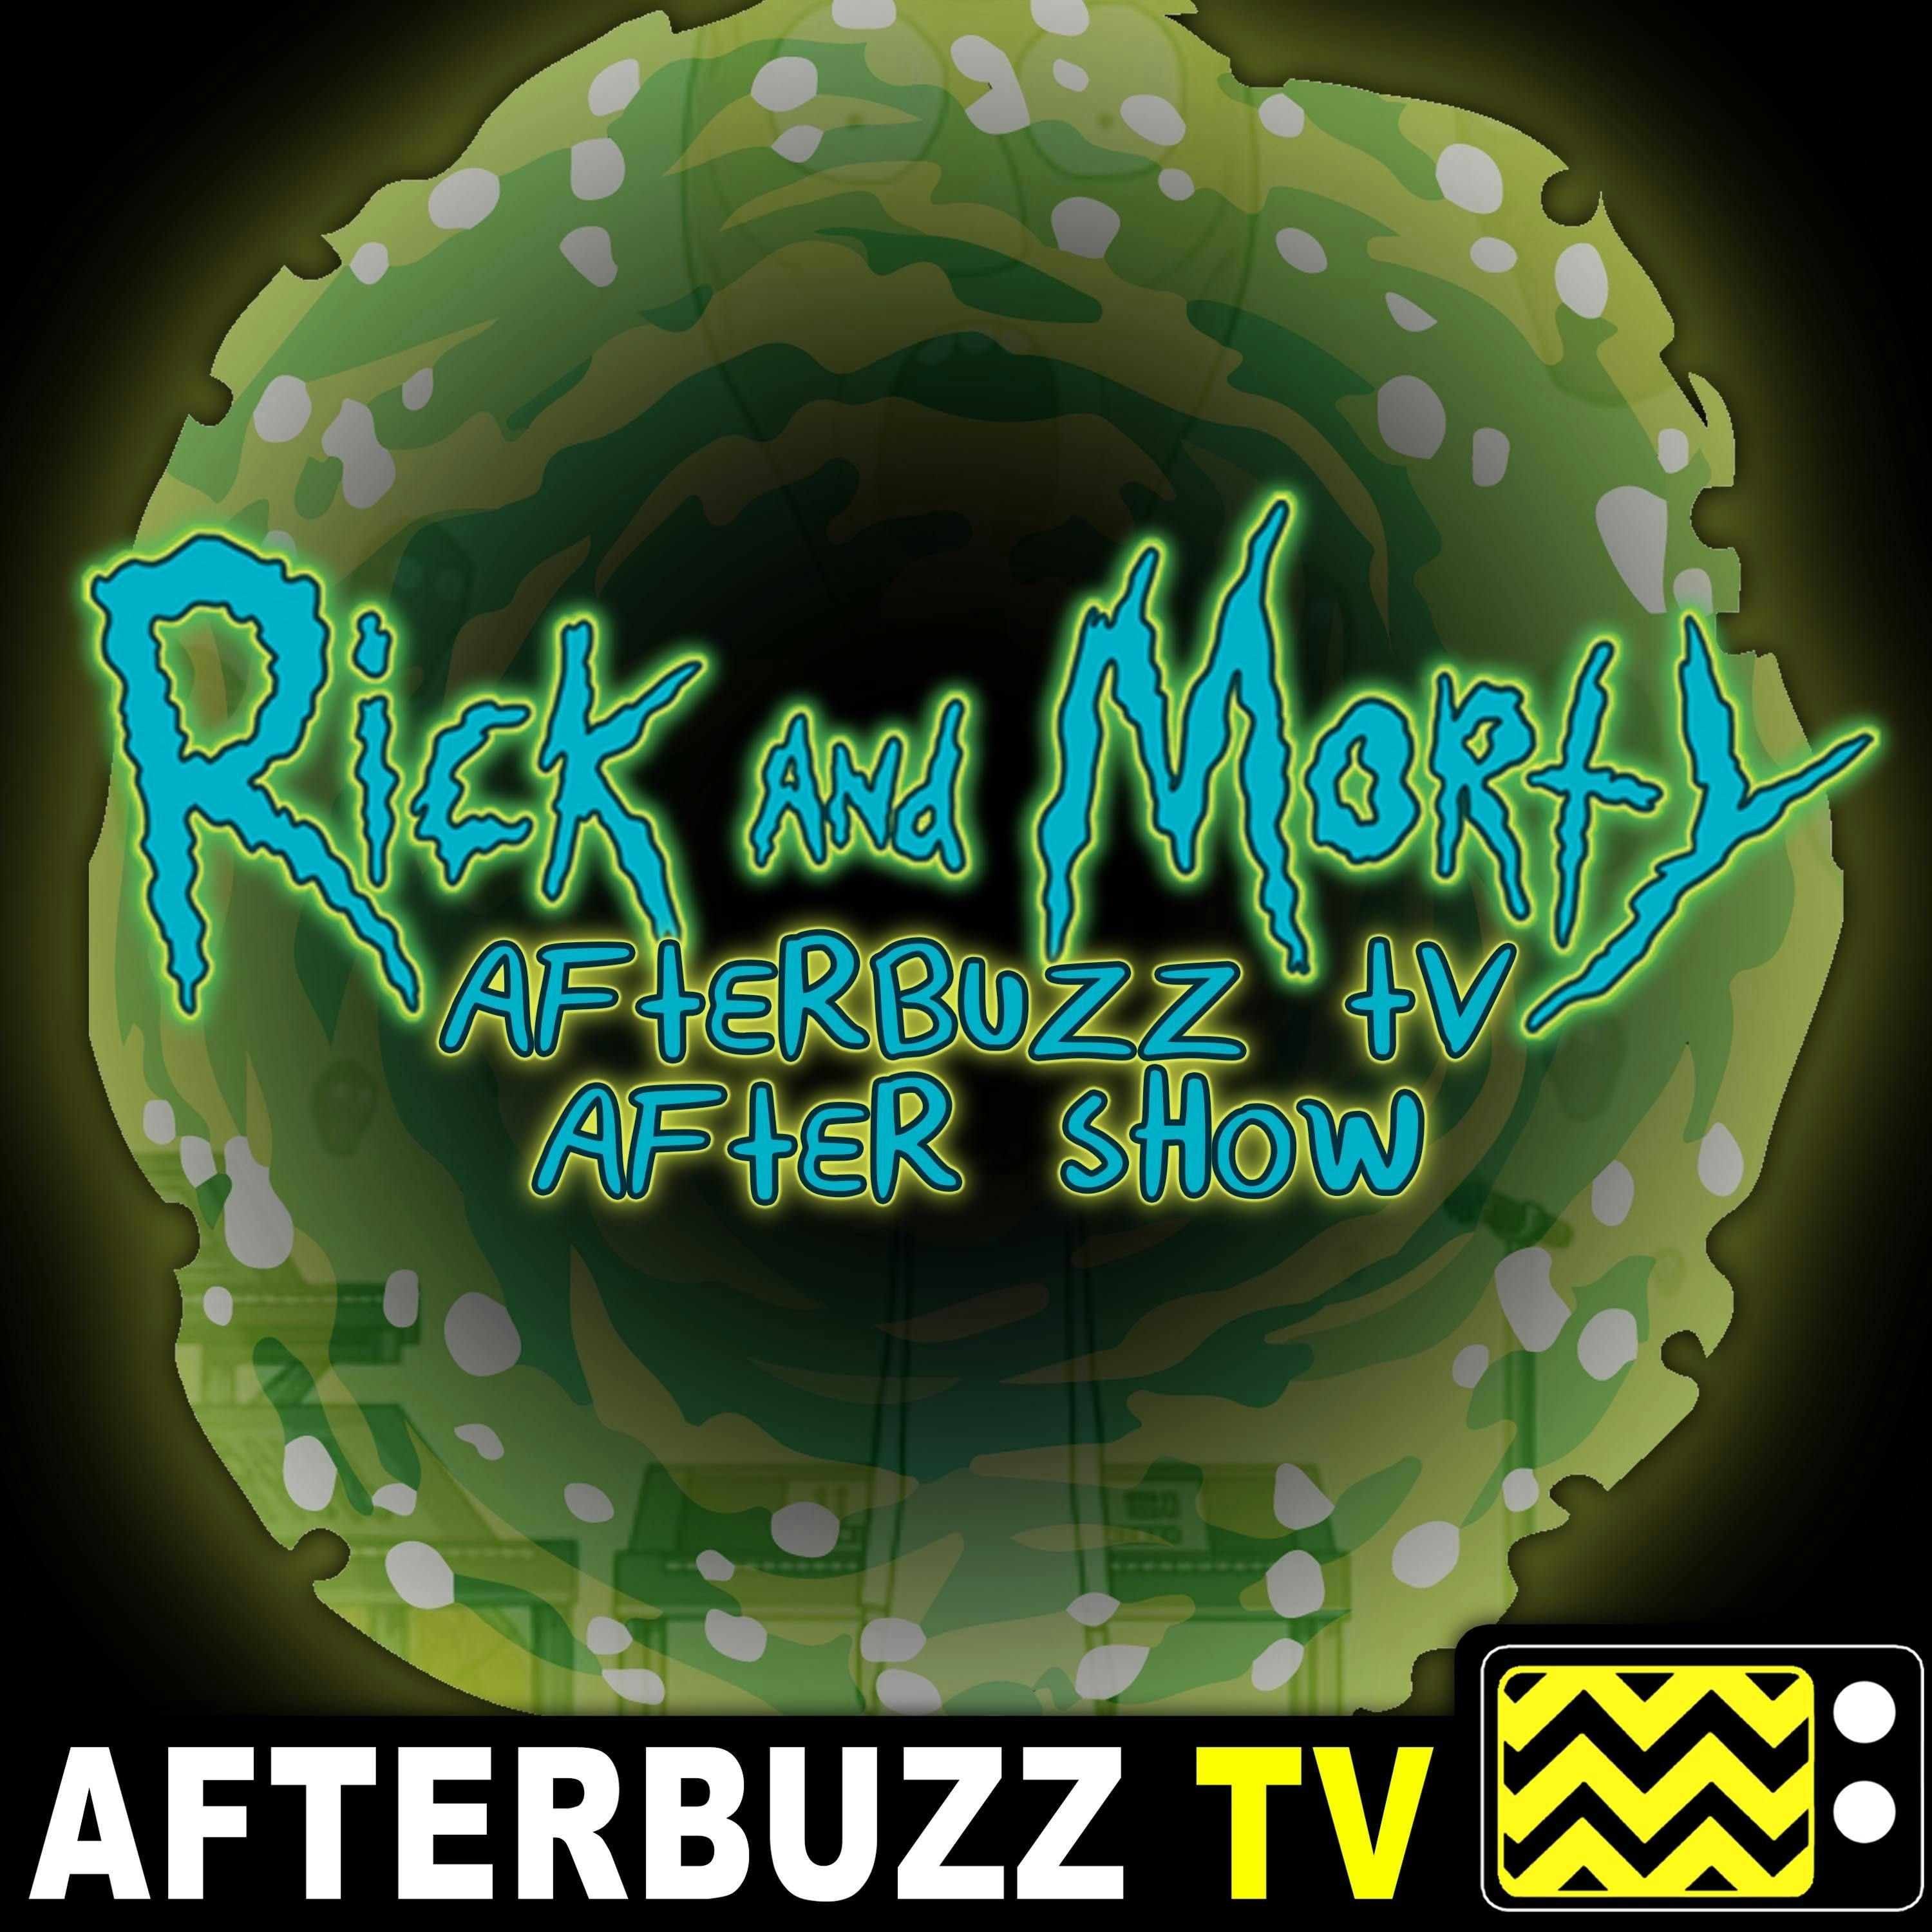 Rick & Morty S4 E8 Recap & After Show: Rick teaches a lesson that needed to be taught.